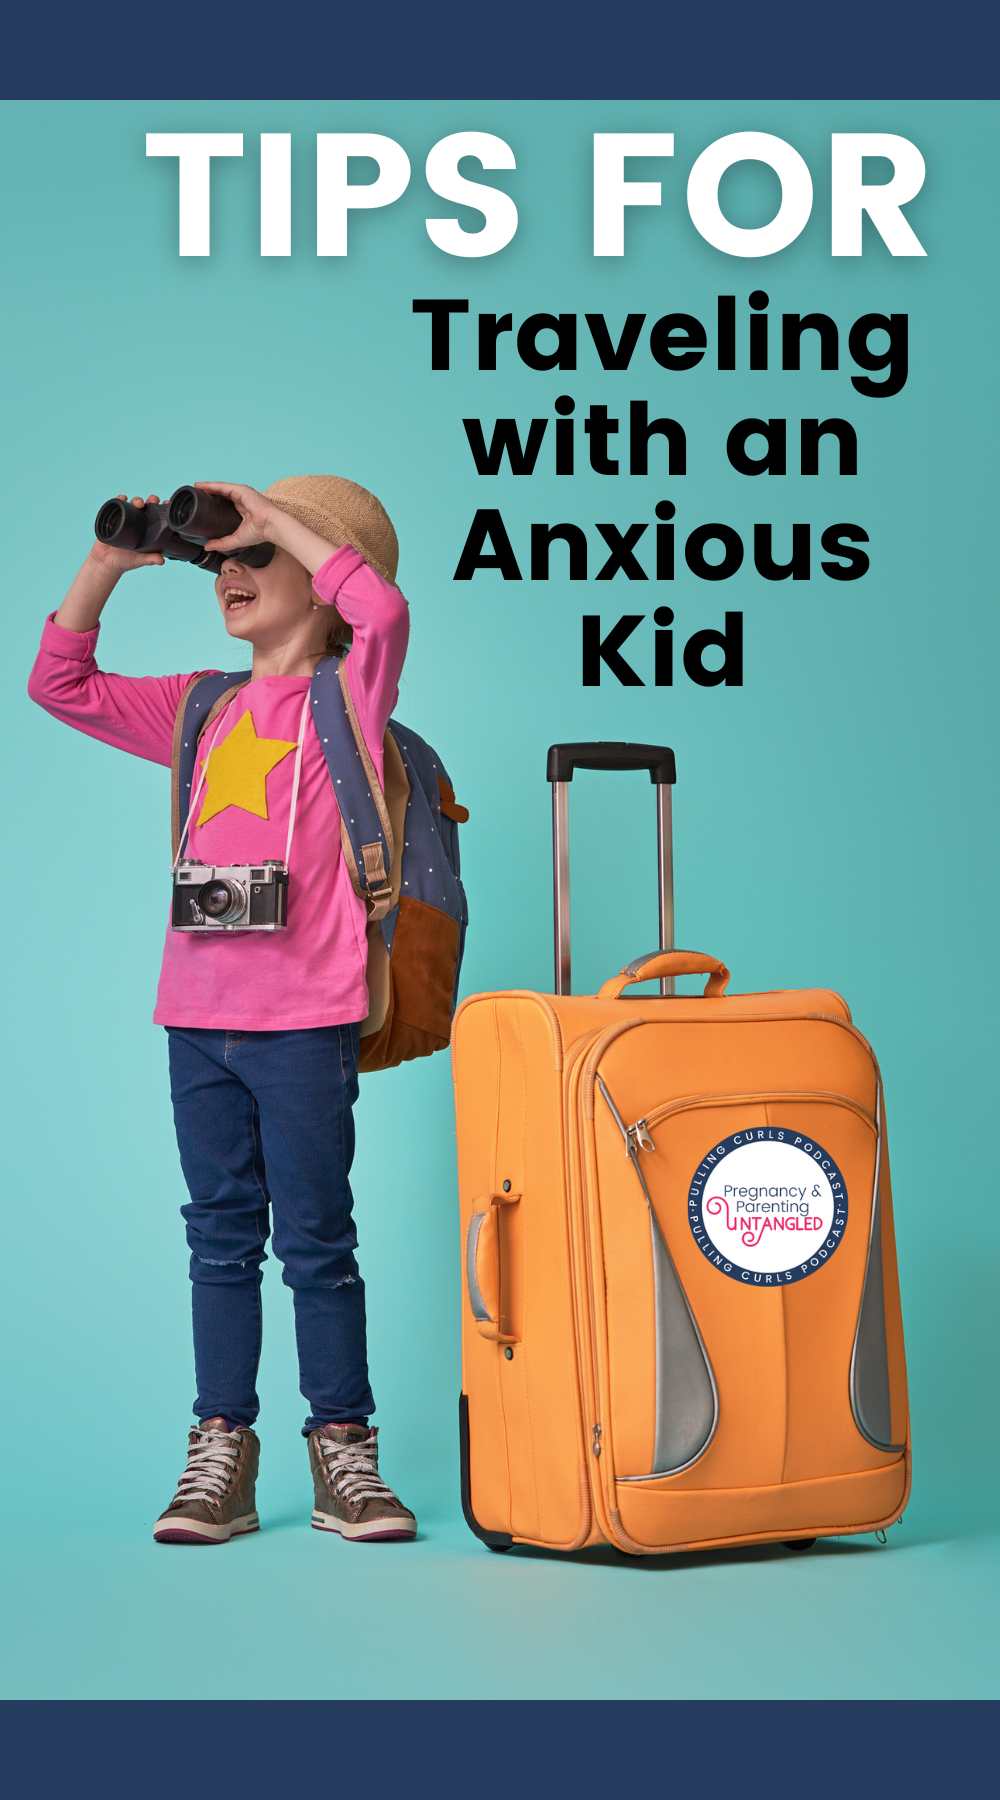 We're headed into the holiday travel season. Whether it's just over the river and through the woods to grandma's house, or further -- let's talk about traveling with inflexible kids. via @pullingcurls